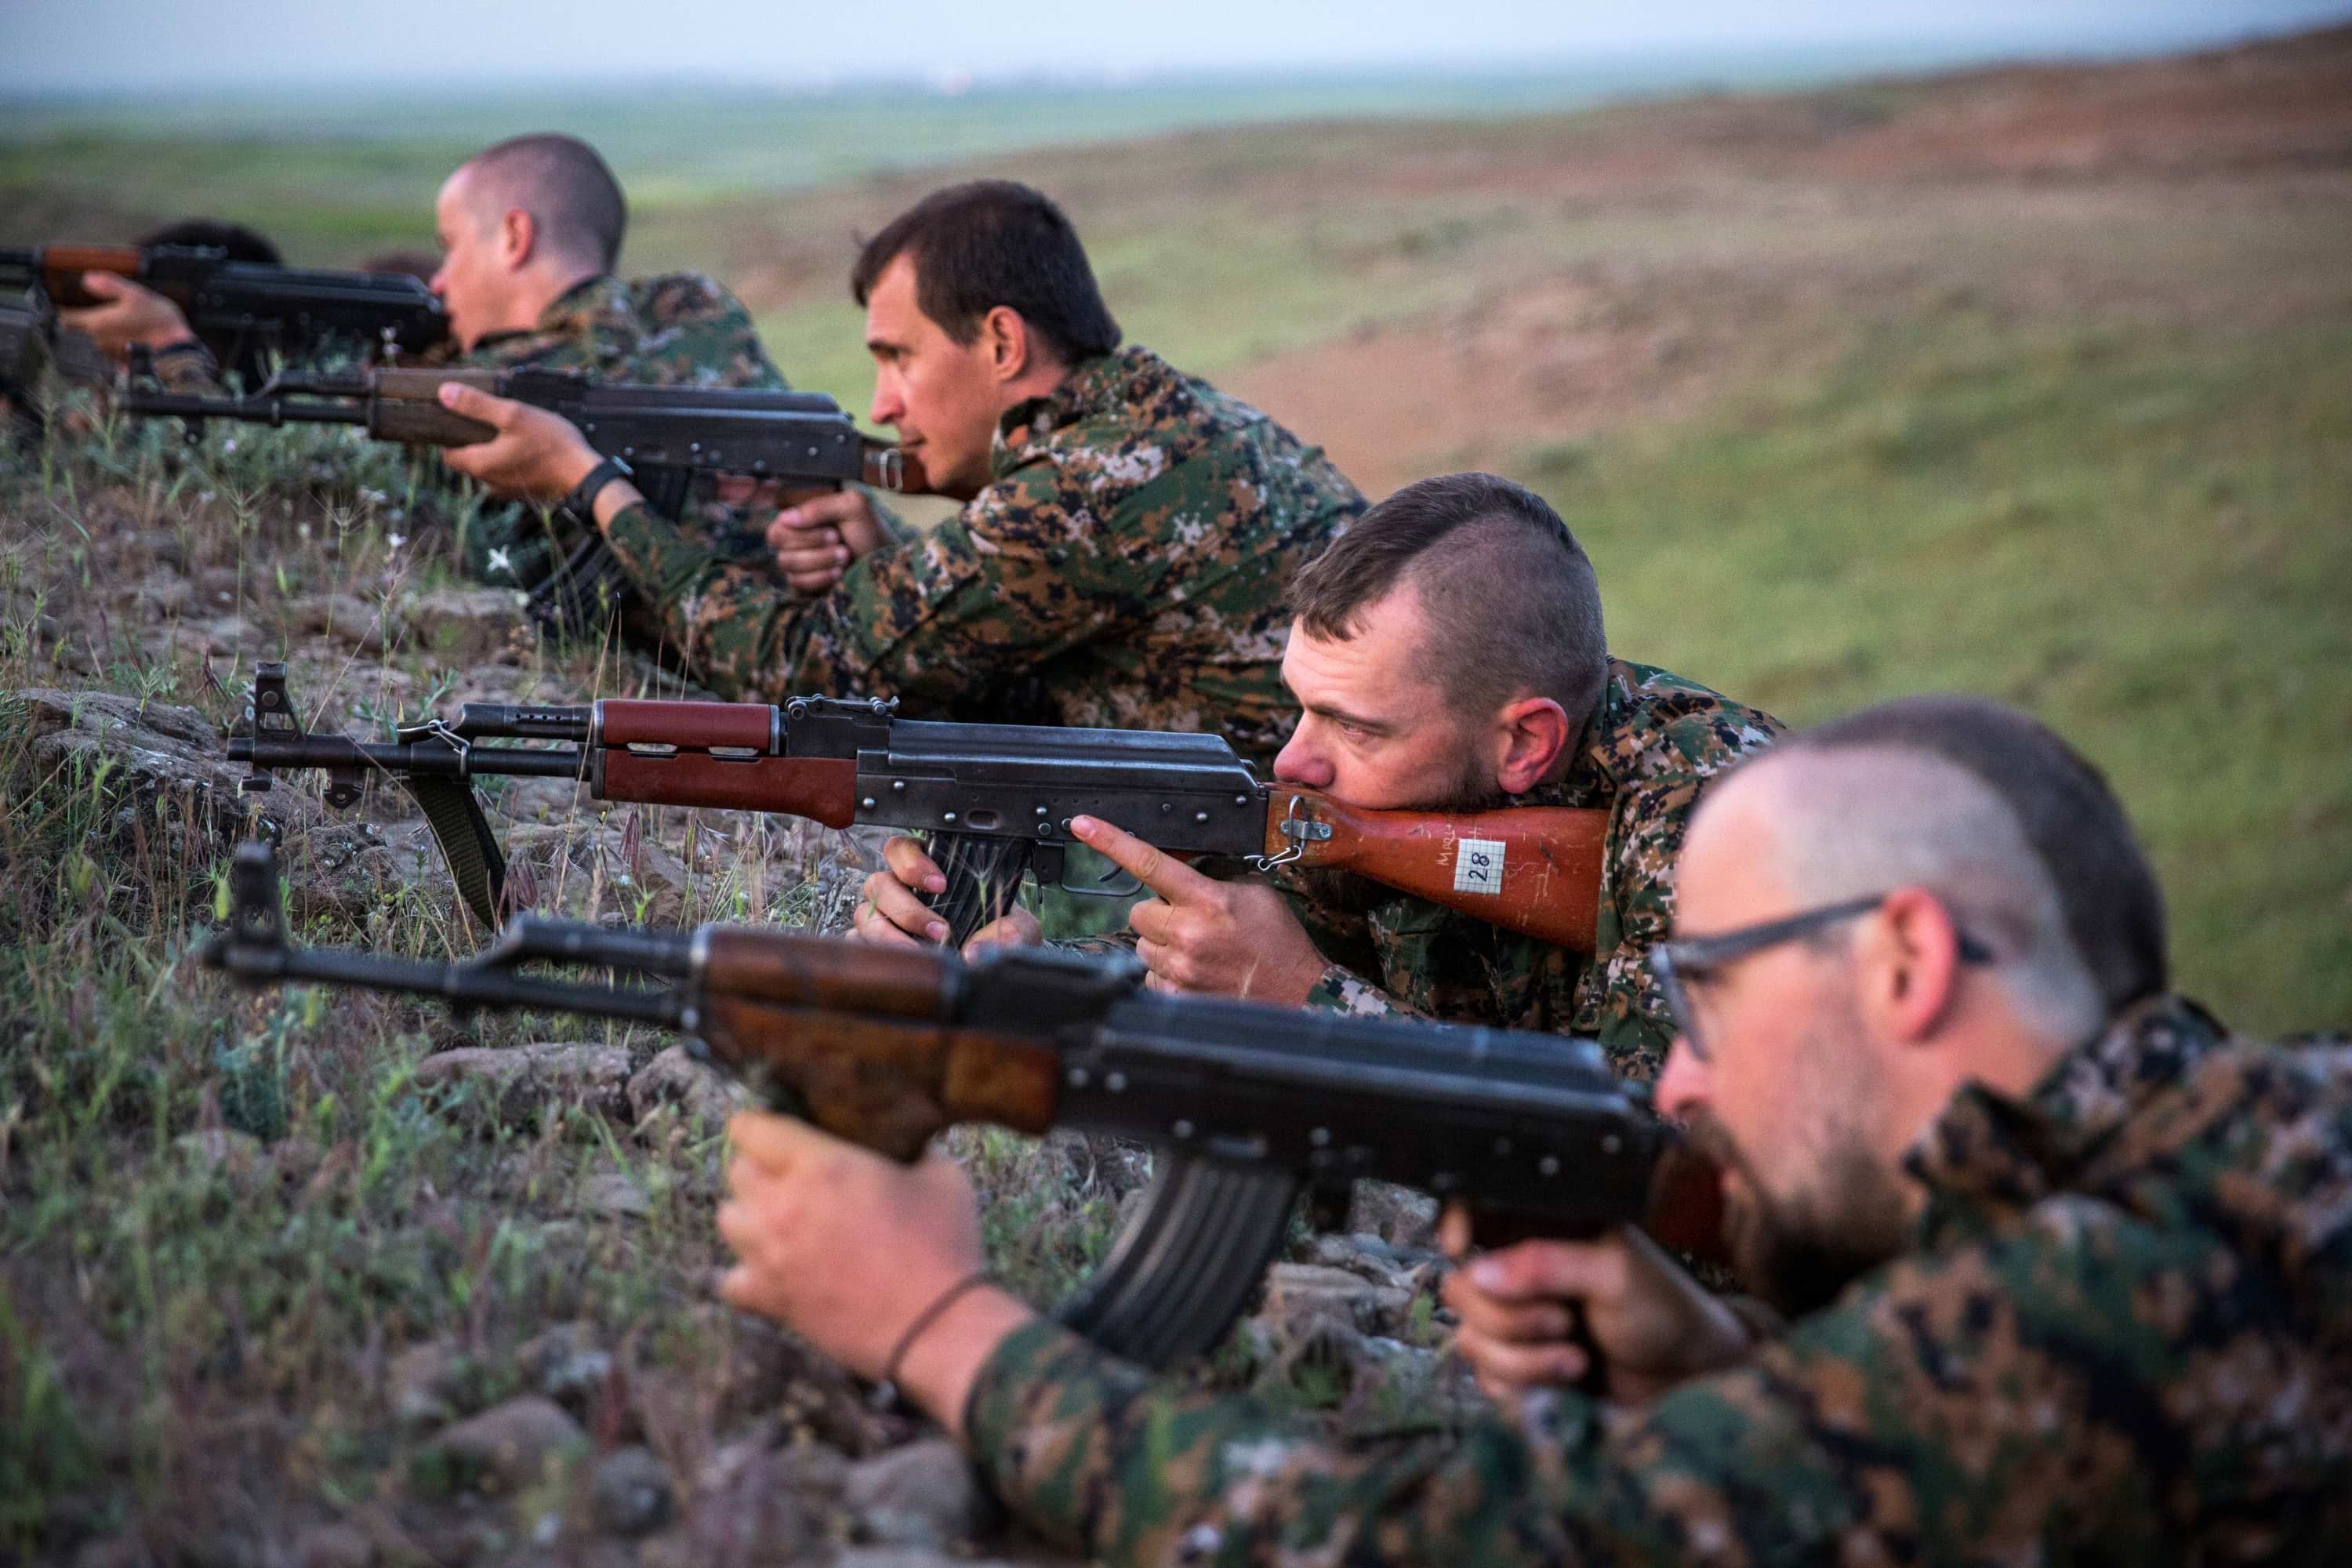 The Foreign fighters of the YPG